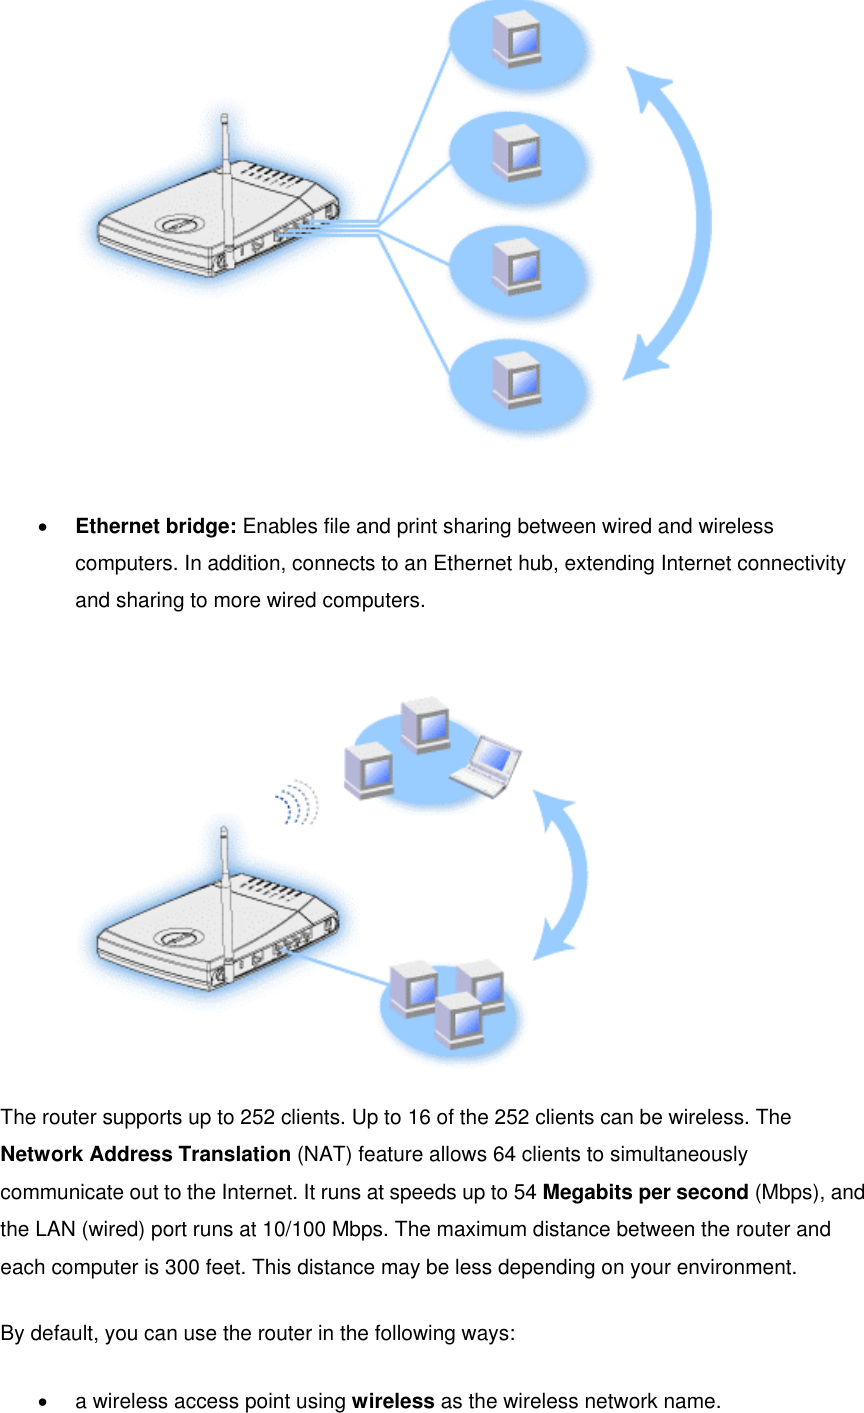   •  Ethernet bridge: Enables file and print sharing between wired and wireless computers. In addition, connects to an Ethernet hub, extending Internet connectivity and sharing to more wired computers.    The router supports up to 252 clients. Up to 16 of the 252 clients can be wireless. The Network Address Translation (NAT) feature allows 64 clients to simultaneously communicate out to the Internet. It runs at speeds up to 54 Megabits per second (Mbps), and the LAN (wired) port runs at 10/100 Mbps. The maximum distance between the router and each computer is 300 feet. This distance may be less depending on your environment. By default, you can use the router in the following ways: •  a wireless access point using wireless as the wireless network name.   